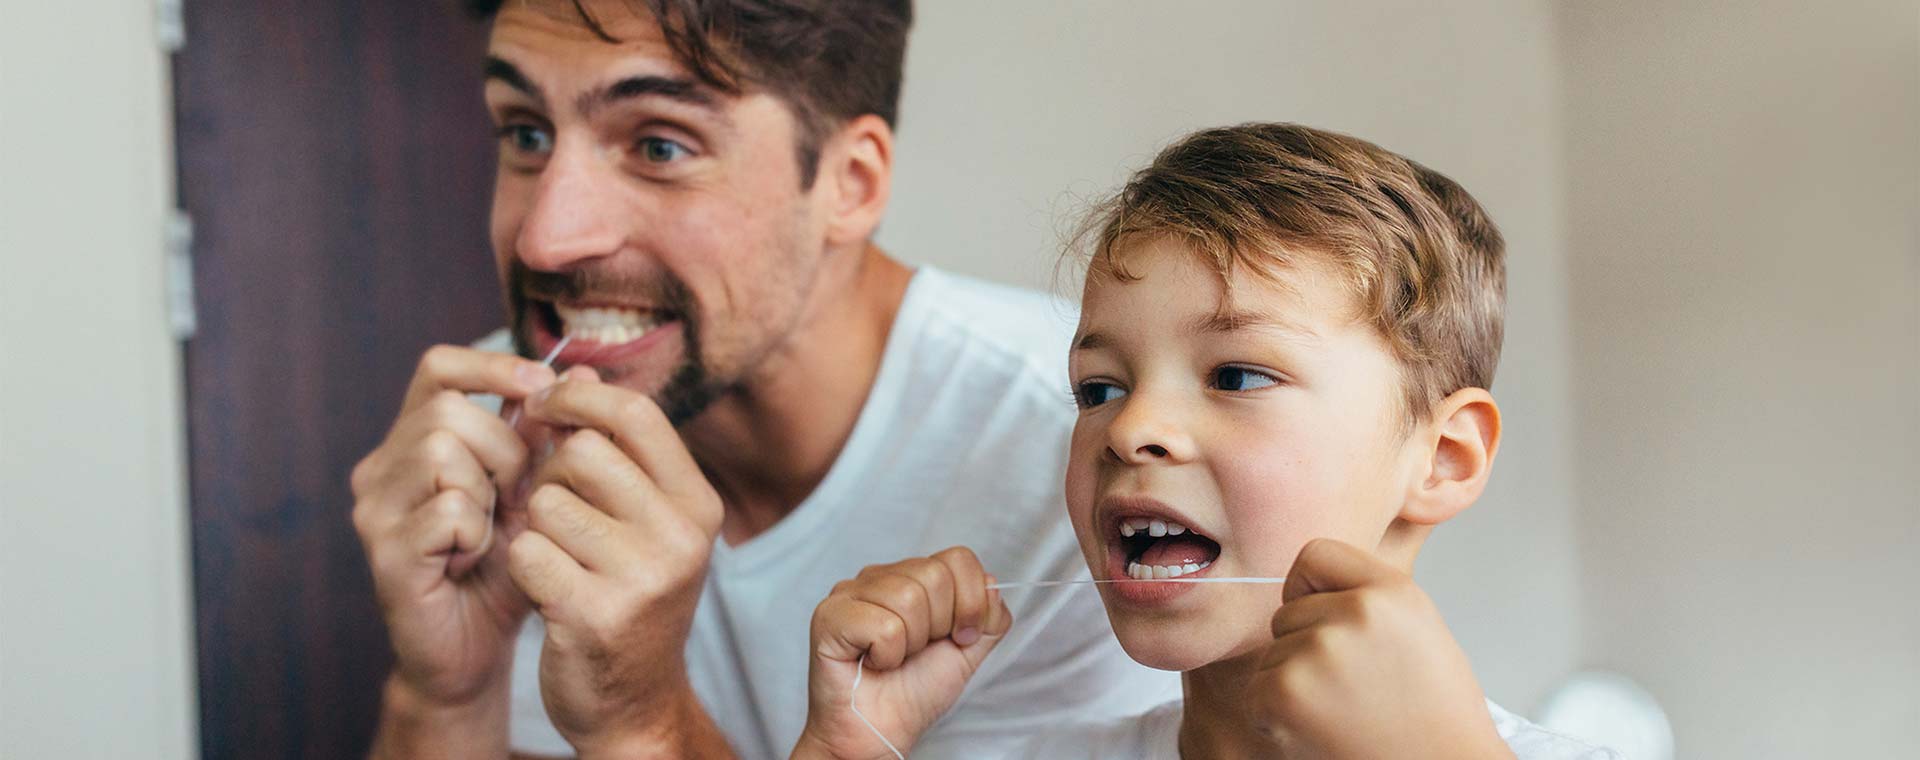 A father and son stand in front of a mirror and are flossing their teeth.